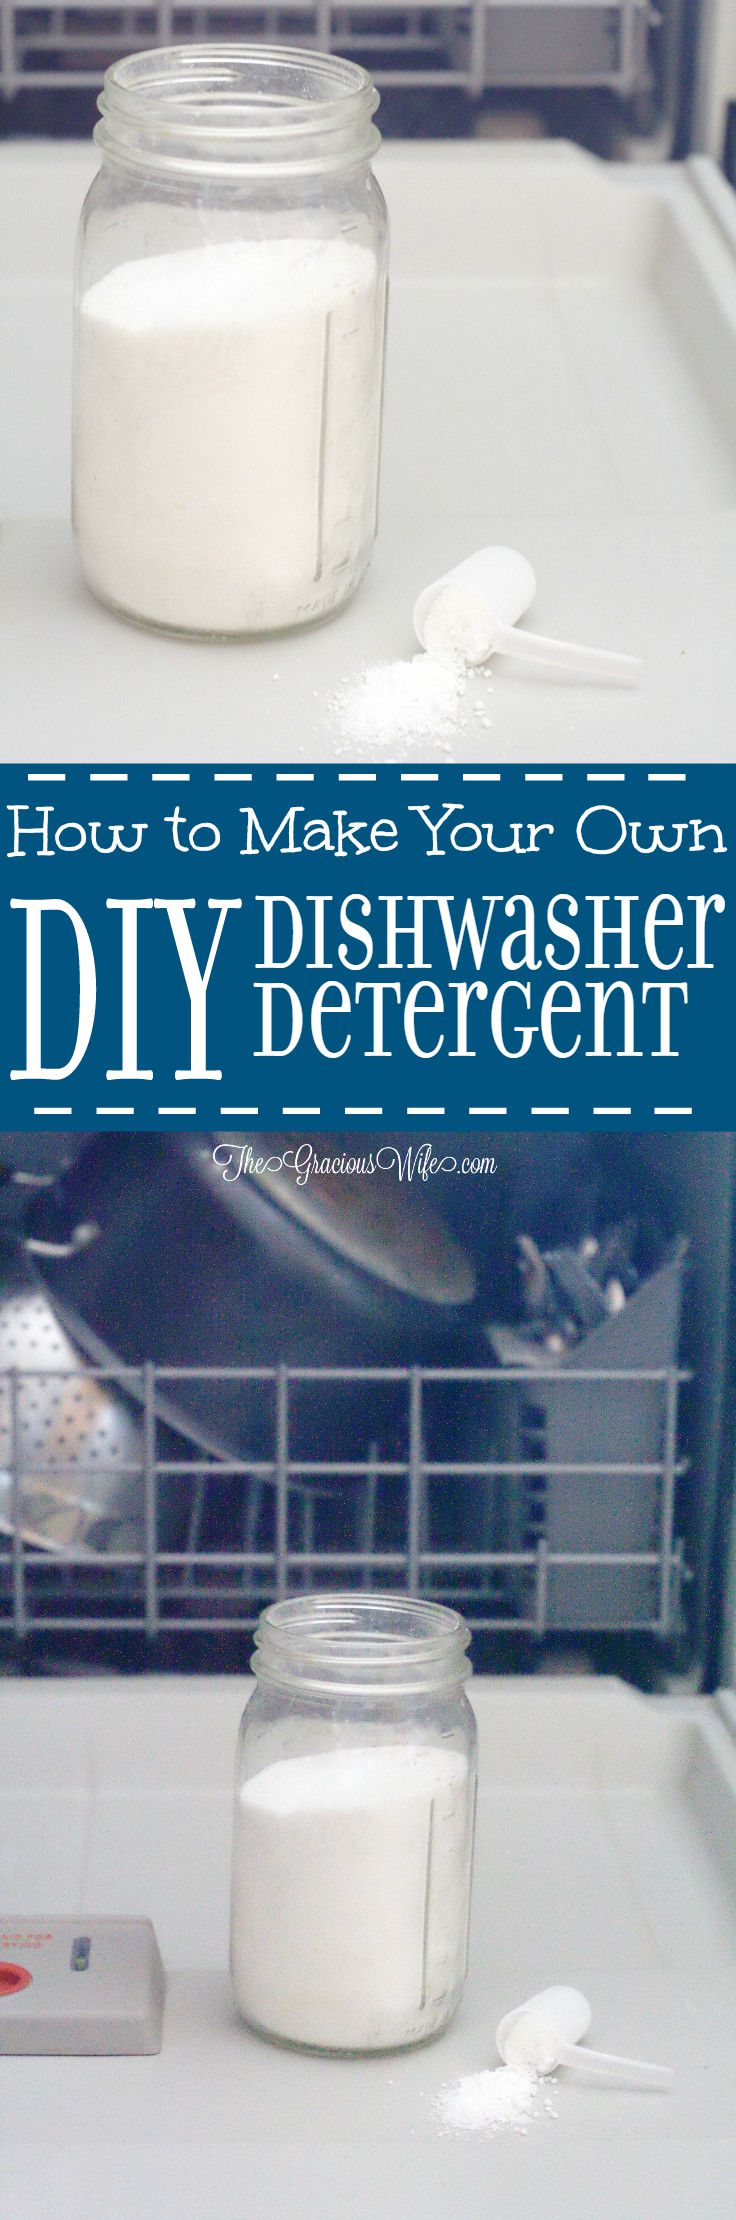 Homemade Dishwasher Detergent - an easy DIY cleaning product.  Super easy to make and works great! It's the only dish detergent I use!